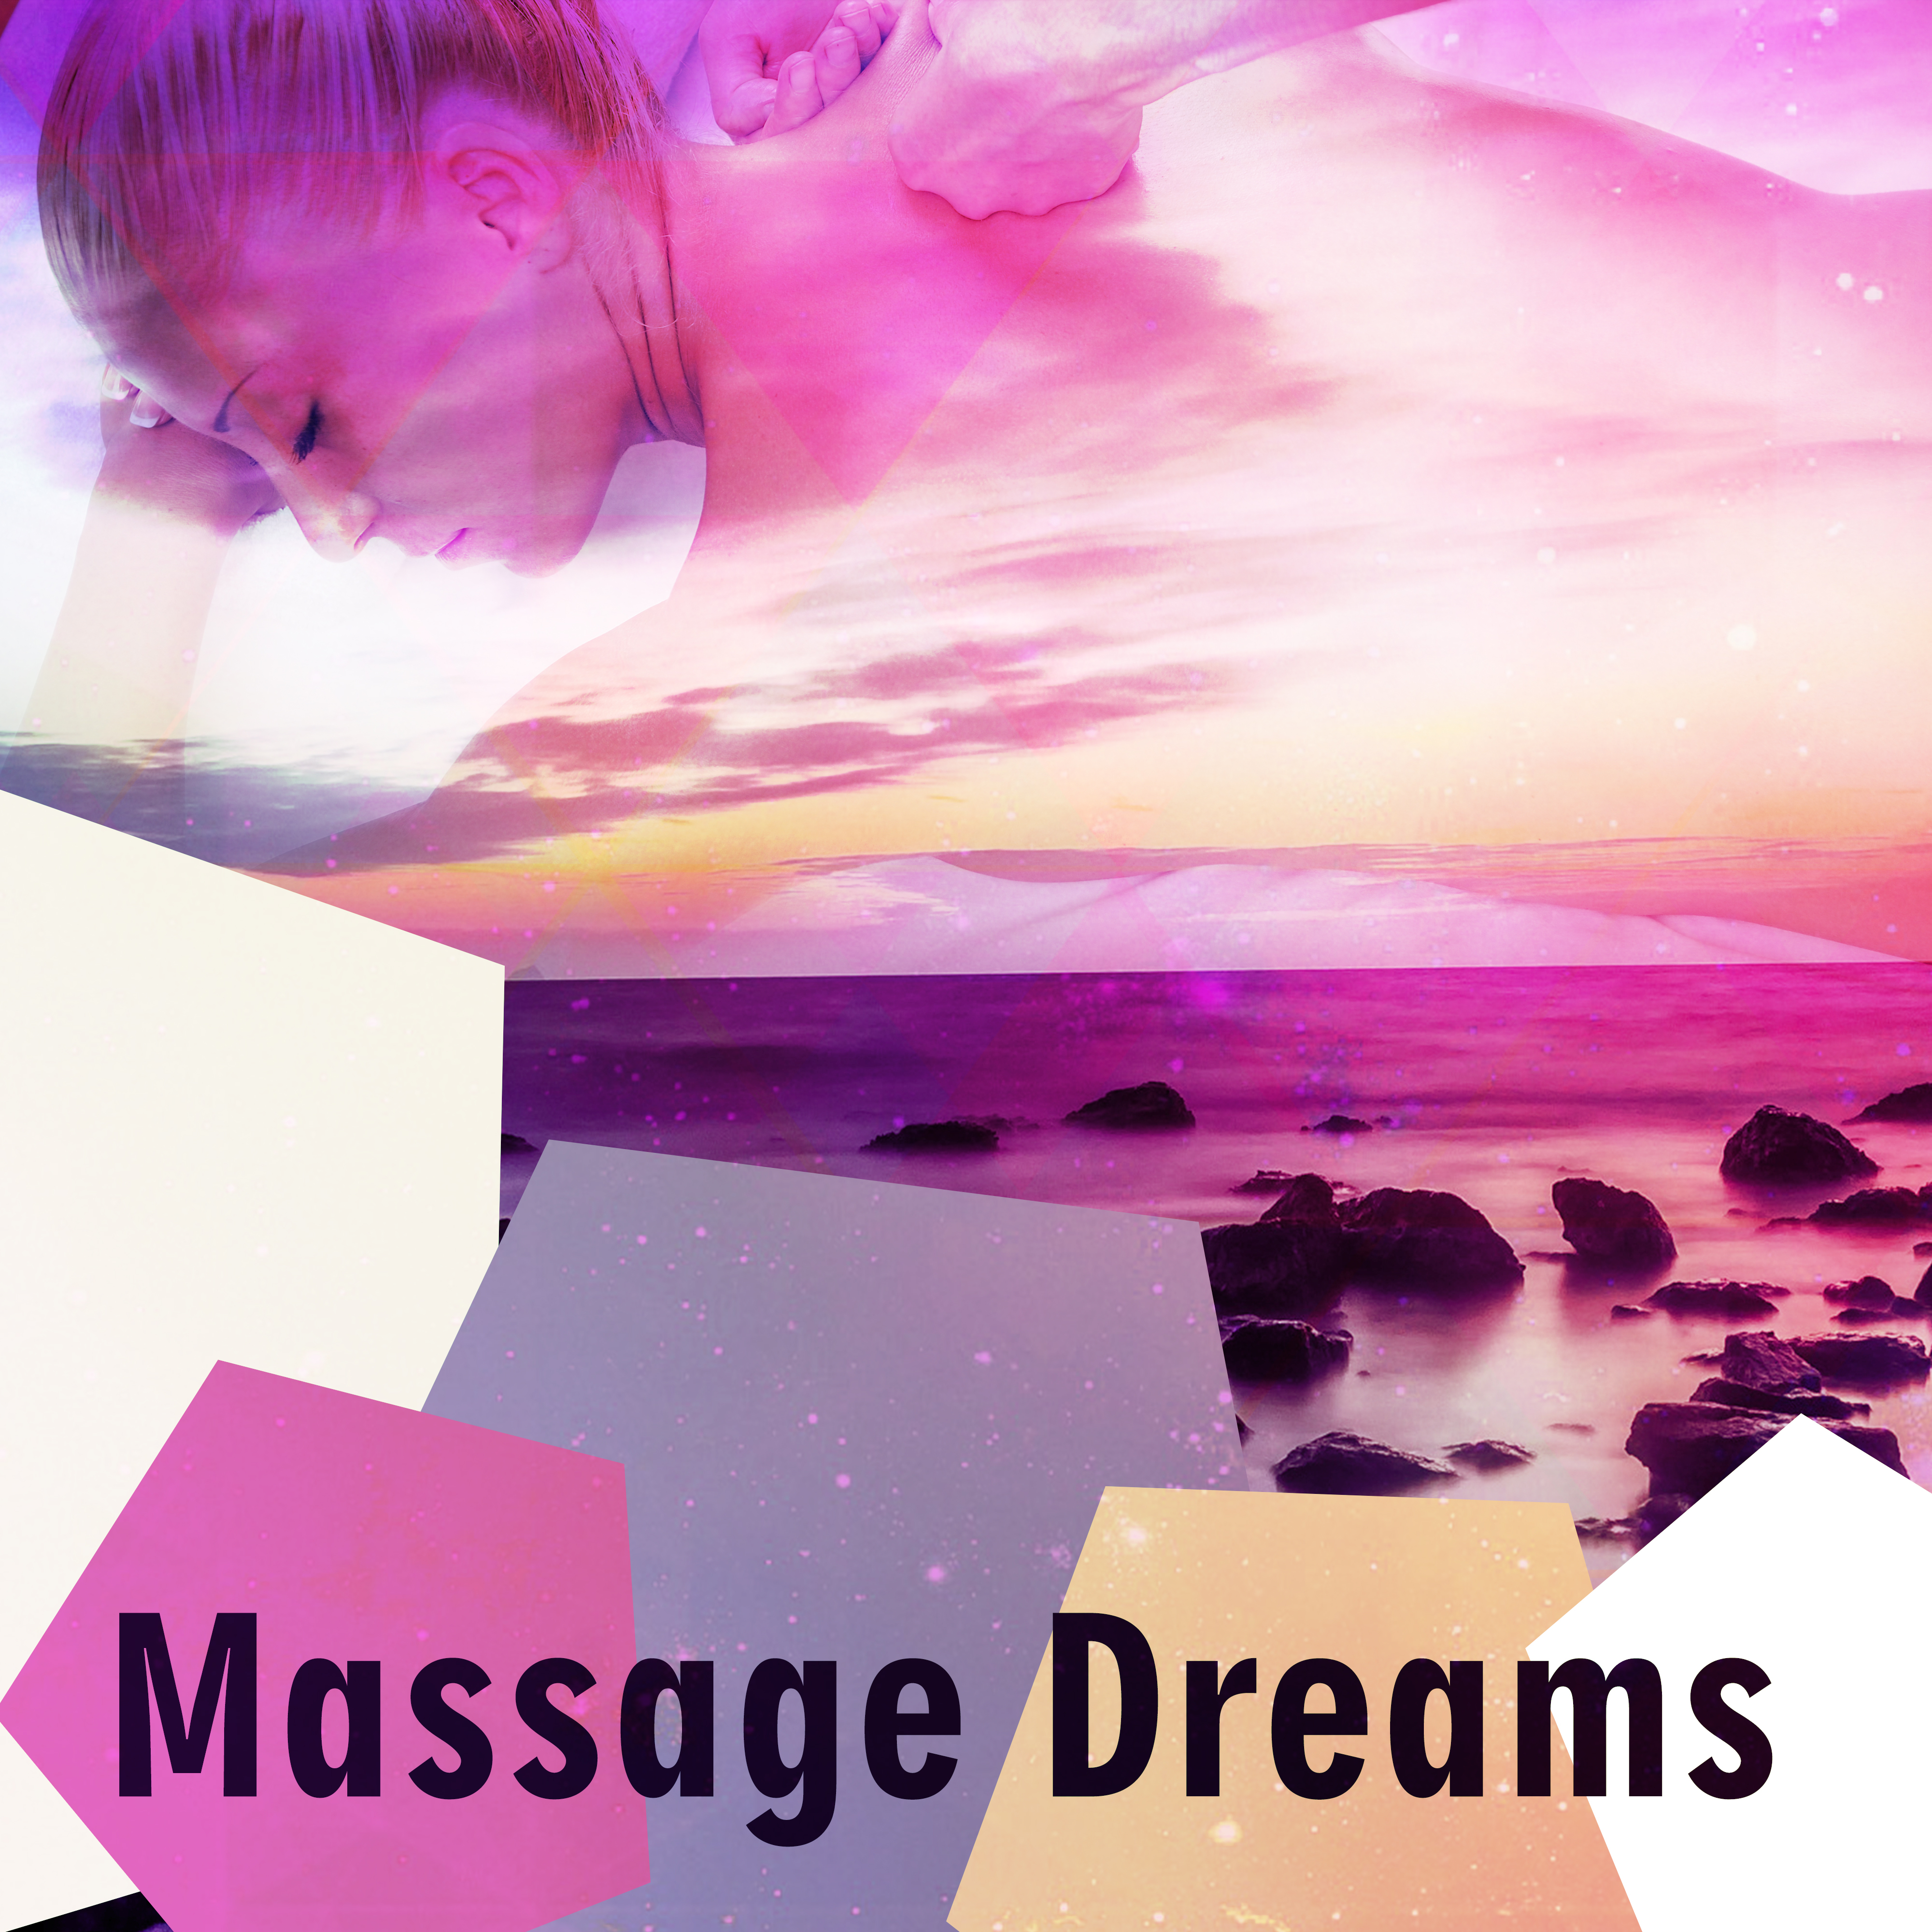 Massage Dreams – Relaxing Spa Music, Nature Sounds for Relaxation, Meditation Spa, Healing Music, Deep Sleep, Soothing Piano, Guitar, Flute Music